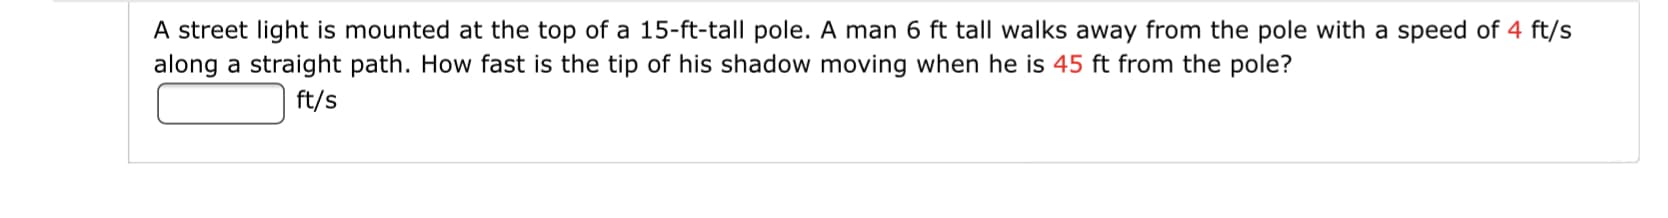 A street light is mounted at the top of a 15-ft-tall pole. A man 6 ft tall walks away from the pole with a speed of 4 ft/s
along a straight path. How fast is the tip of his shadow moving when he is 45 ft from the pole?
ft/s
